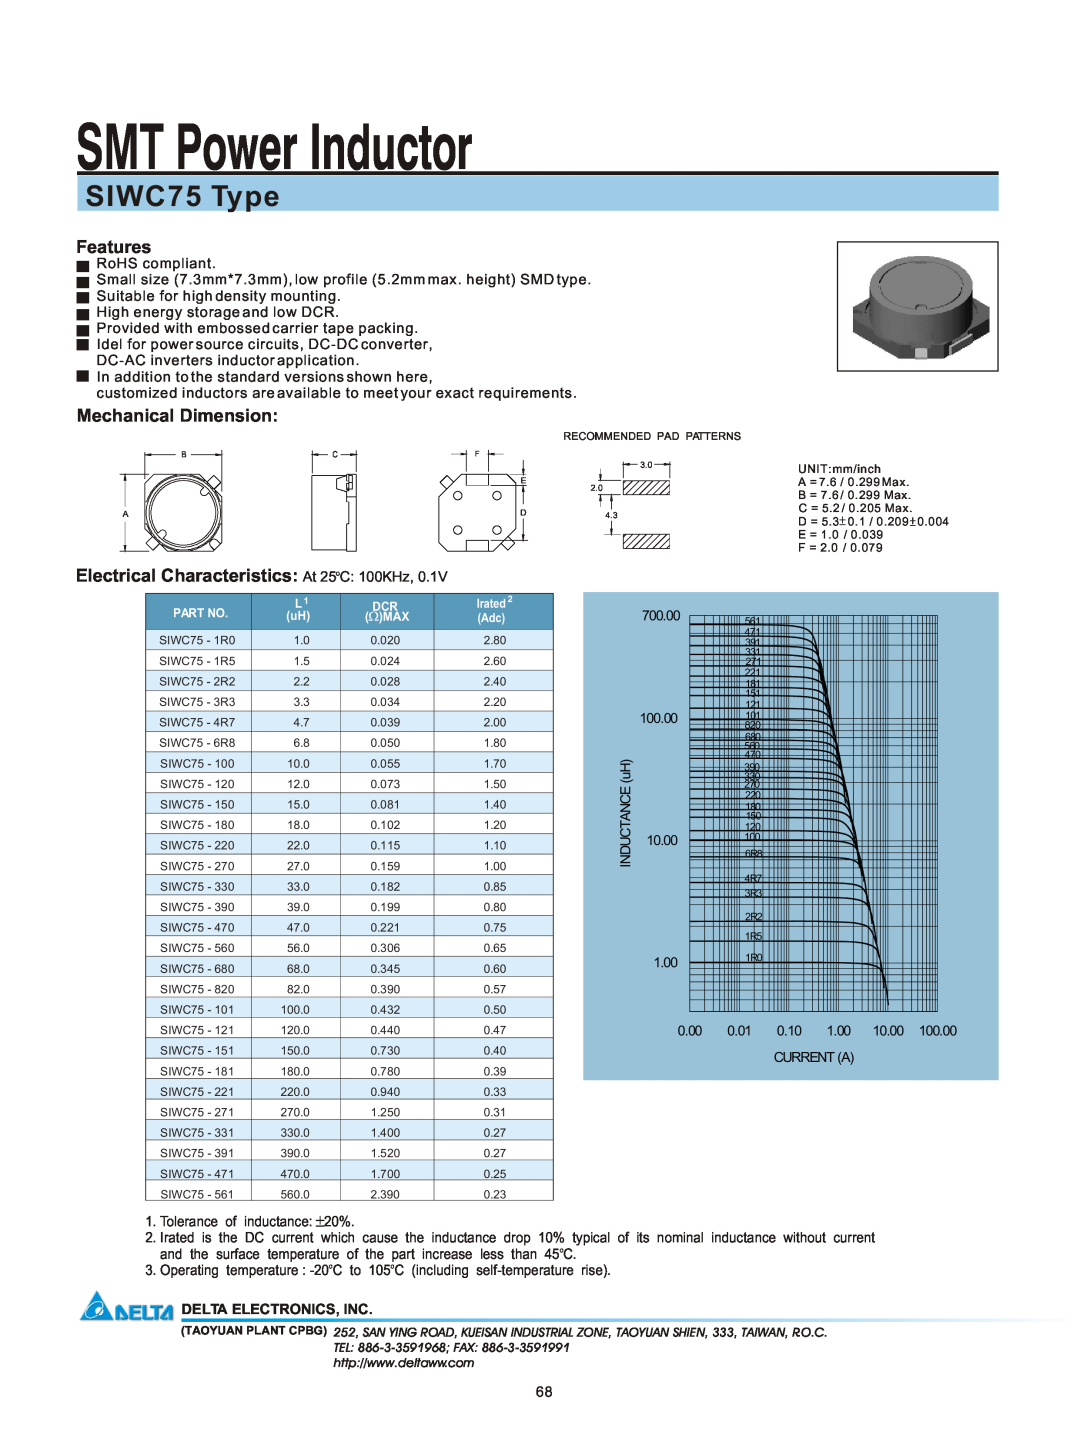 Delta Electronics manual SMT Power Inductor, SIWC75 Type, Features, Mechanical Dimension, Delta Electronics, Inc 